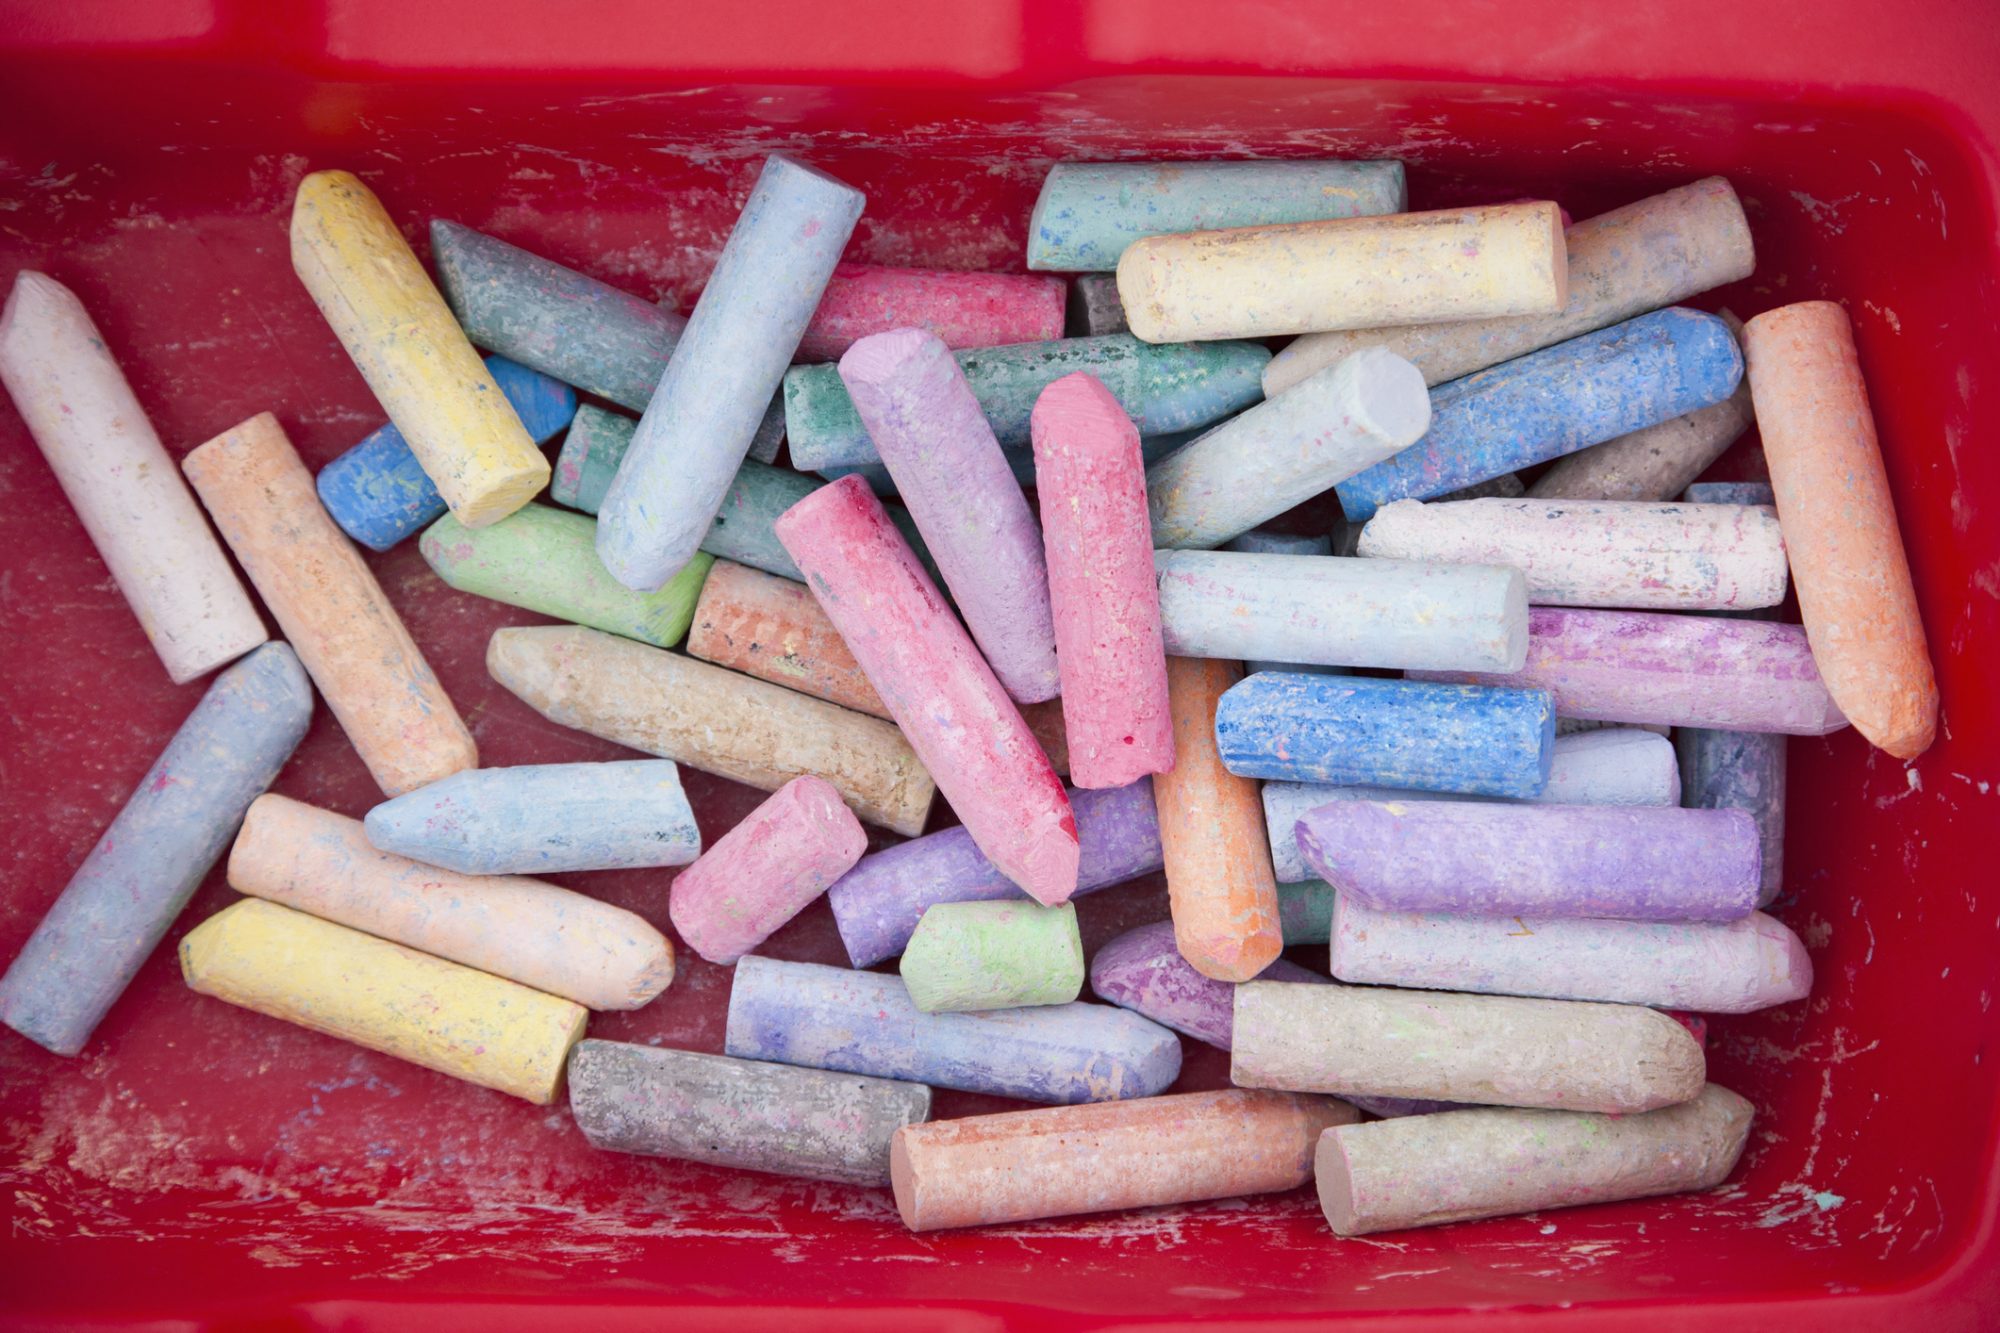 An image of a box of chalk.